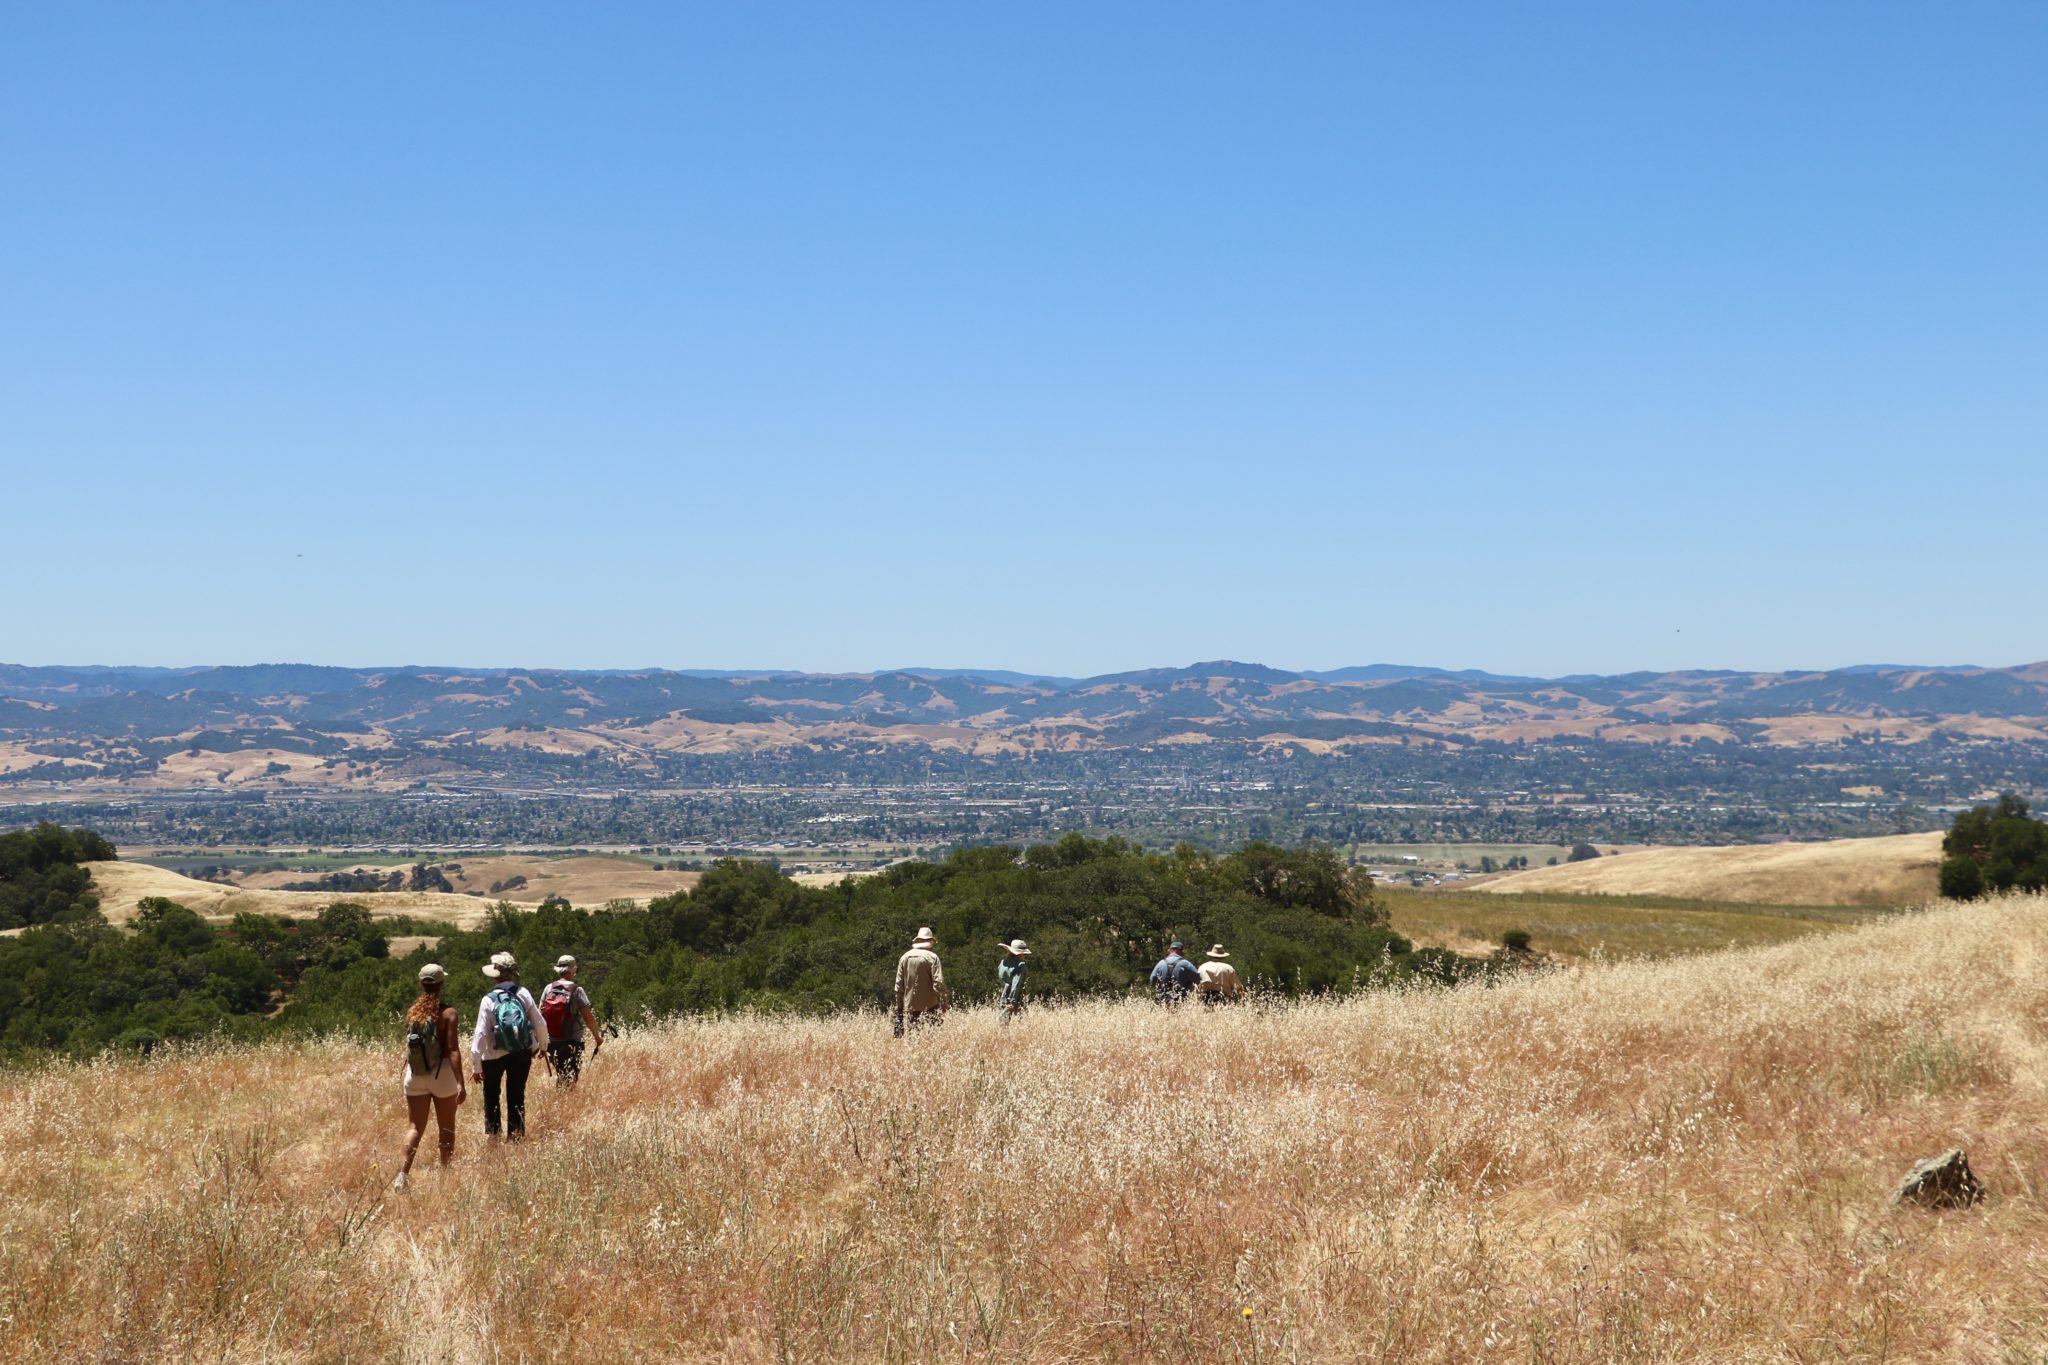 A group of hikers walks across Lafferty Ranch with a view of the Petaluma valley below and a wide blue sky above.